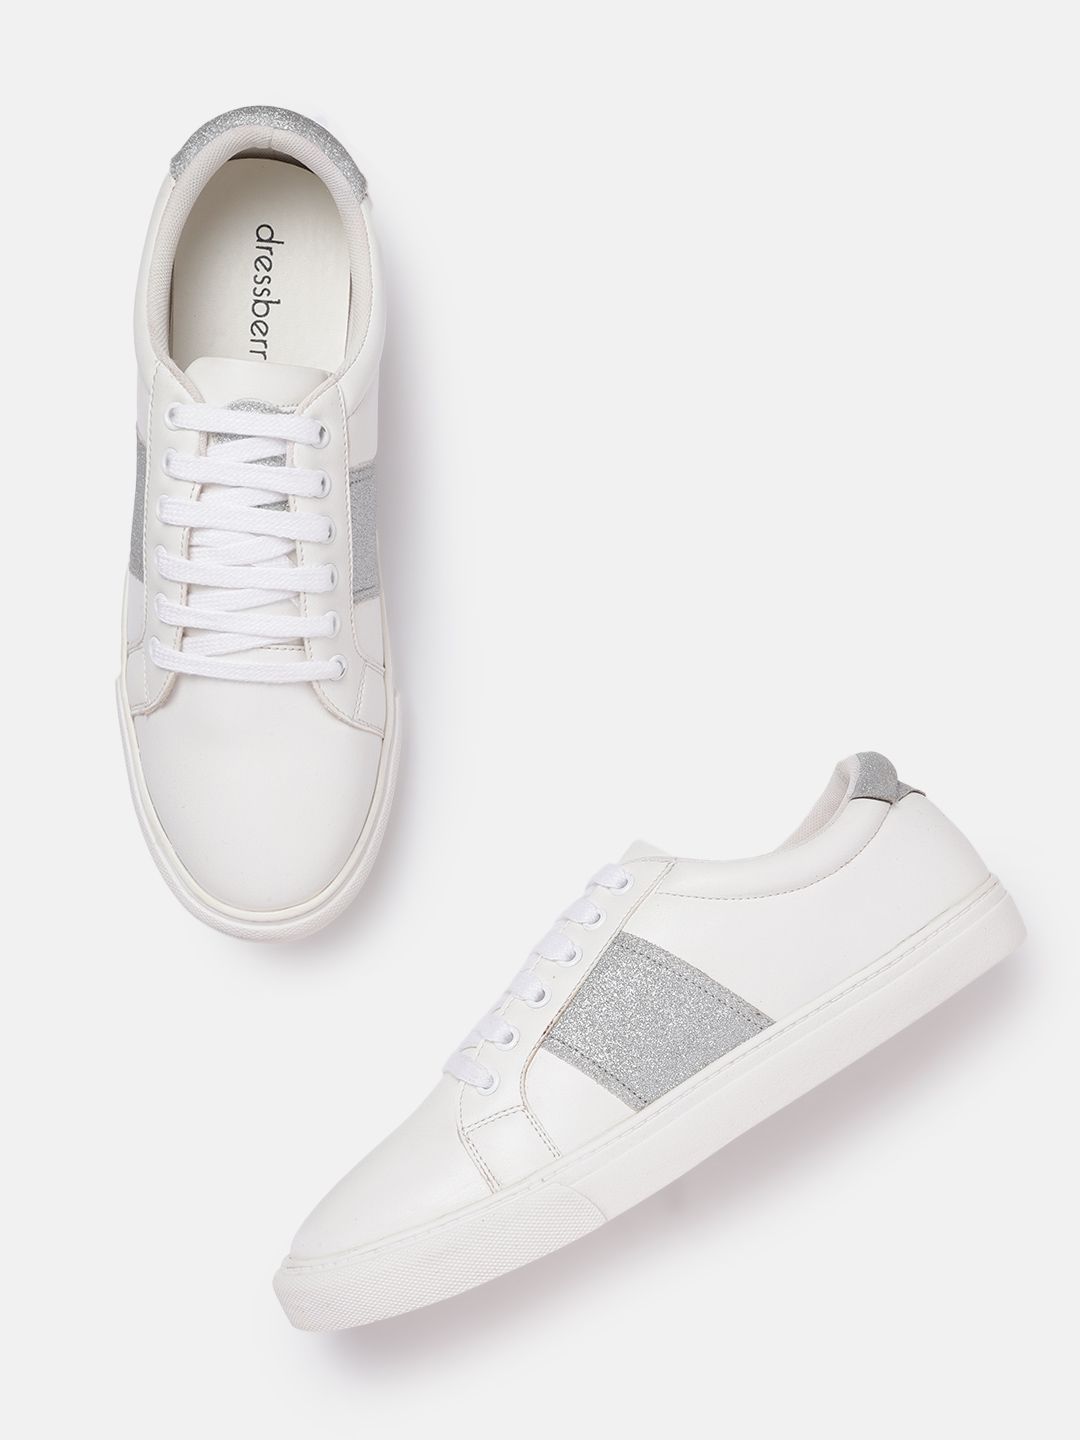 DressBerry Women White & Silver-Toned Colourblocked Leather Sneakers Price in India